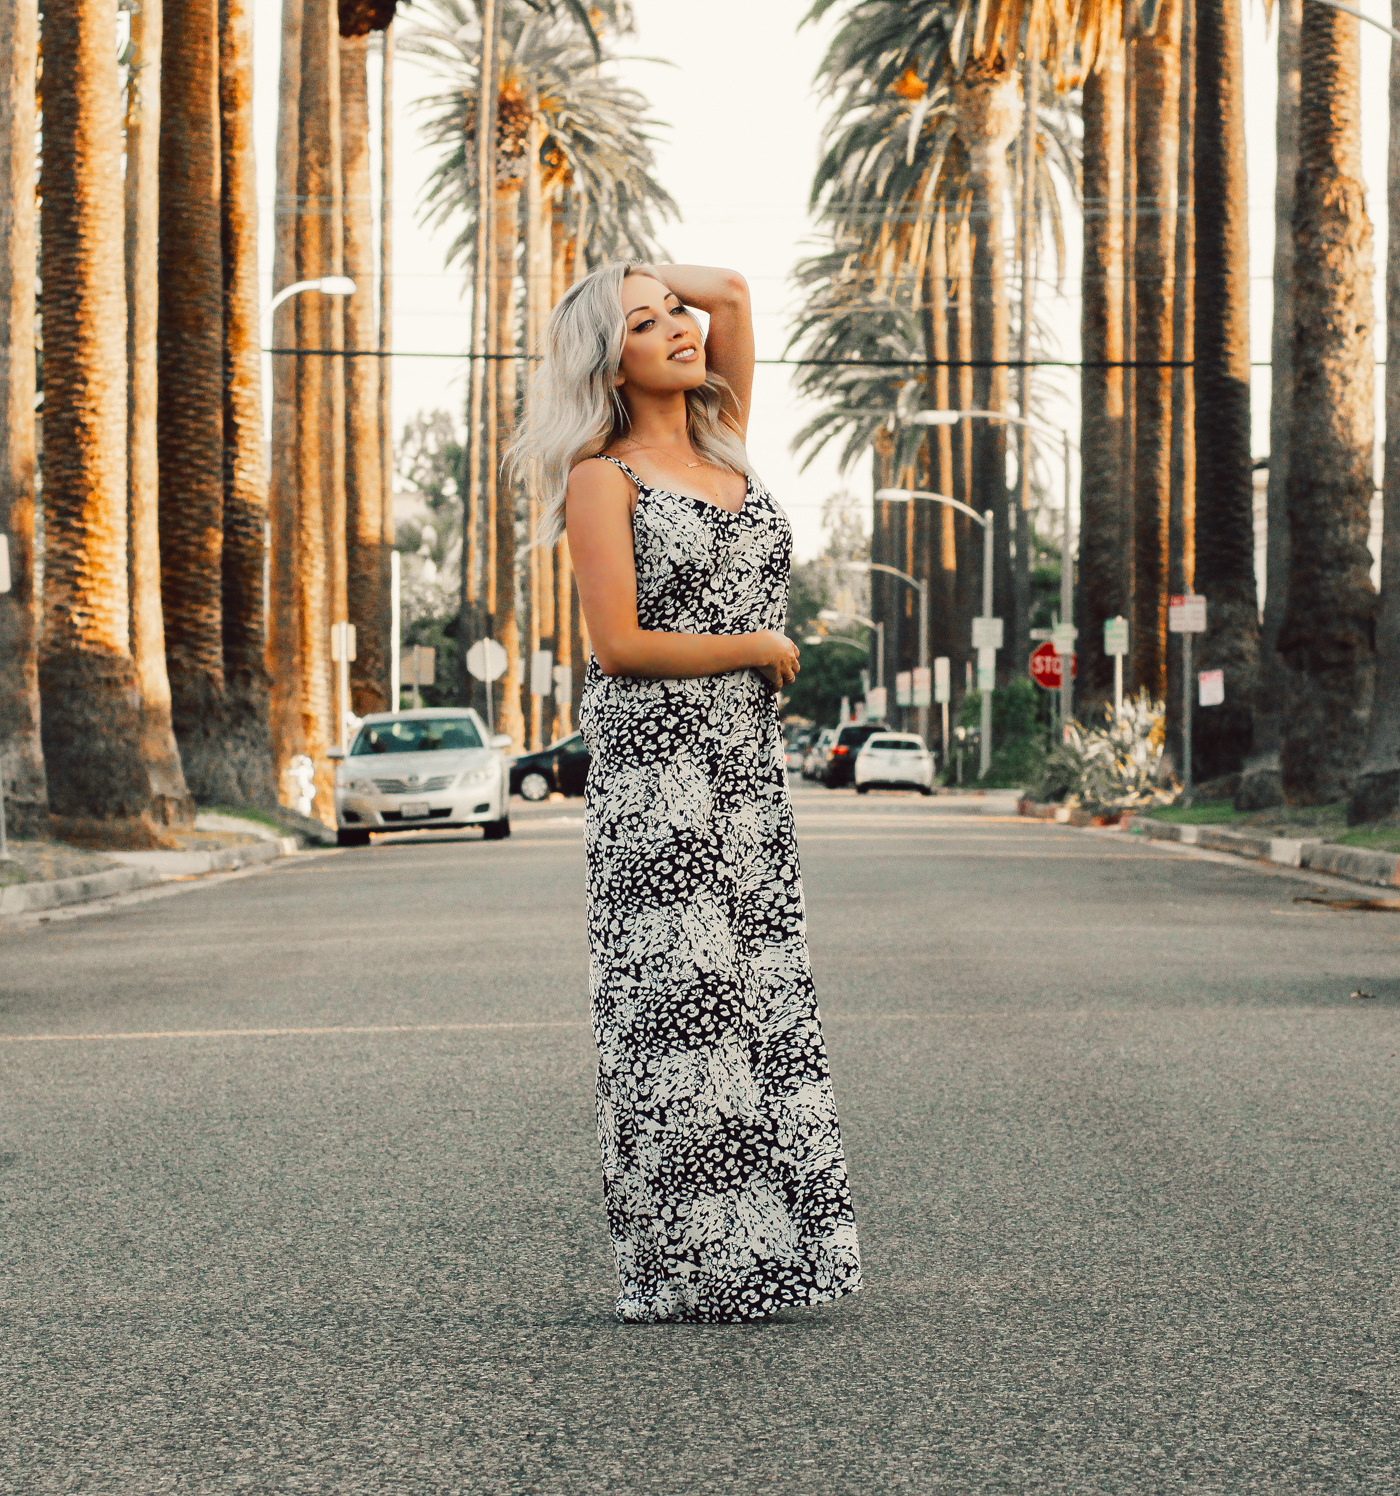 Blondie in the City | Palm Trees in Beverly Hills, Palm Trees, LA Palm Trees, Street of Palm Trees | Long printed maxi